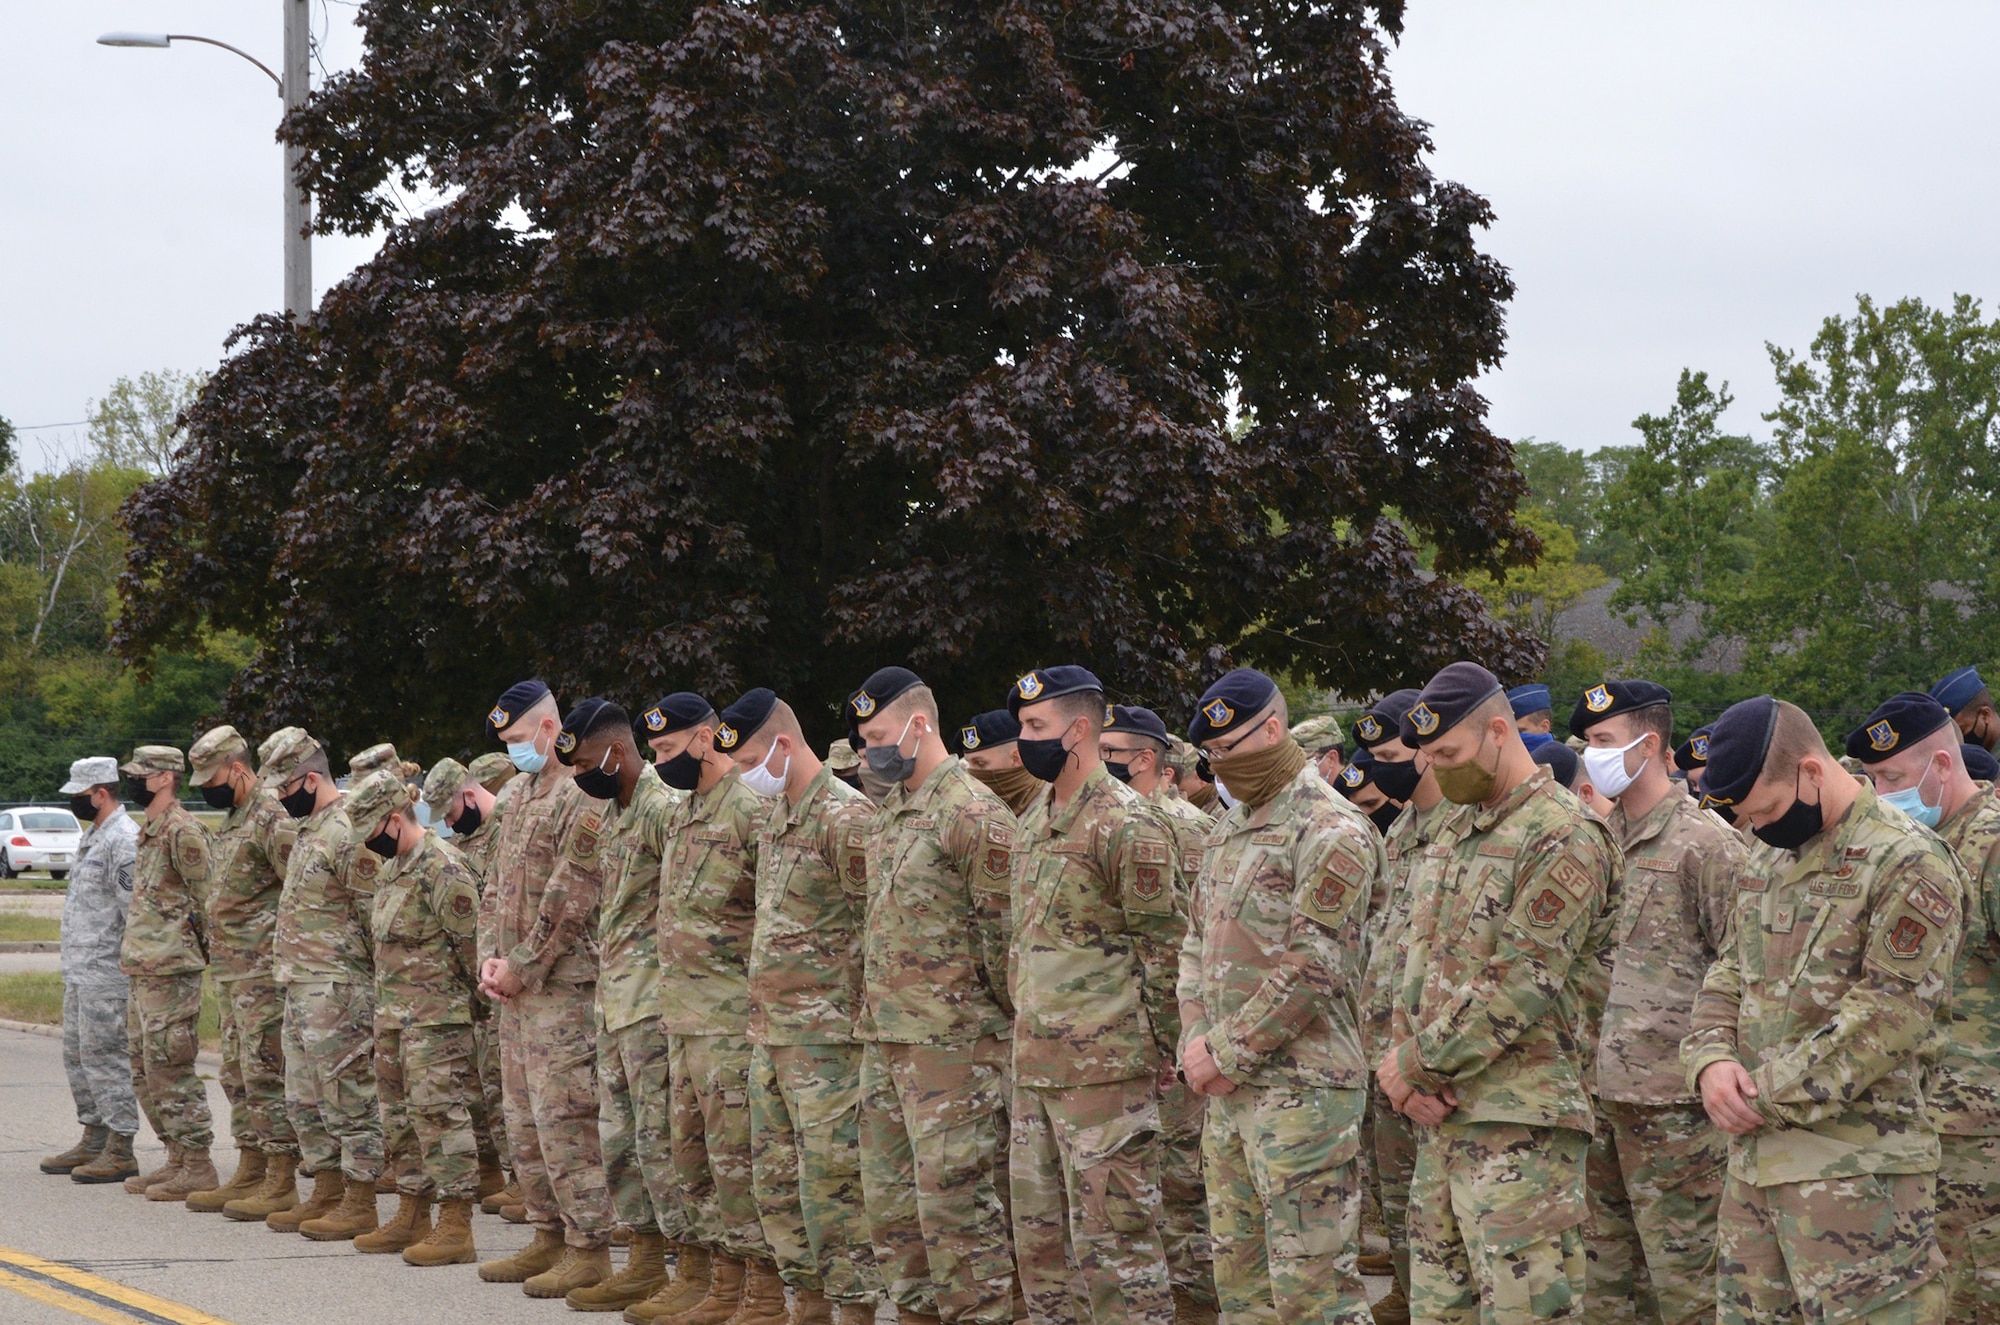 Members of the 445th Airlift Wing honor those who lost their lives Sept. 11, 2001, during a ceremony held at the 445th Airlift Wing headquarters building Sept. 11, 2020. One of the many lives lost that day was Maj. LeRoy Homer, First Officer on United Airlines Flight 93 that crashed in Shanksville, Pa. at 10:03 a.m. that day. Homer was a member of the 445th Airlift Wing’s 356th Airlift Squadron from 1995 to 2000.